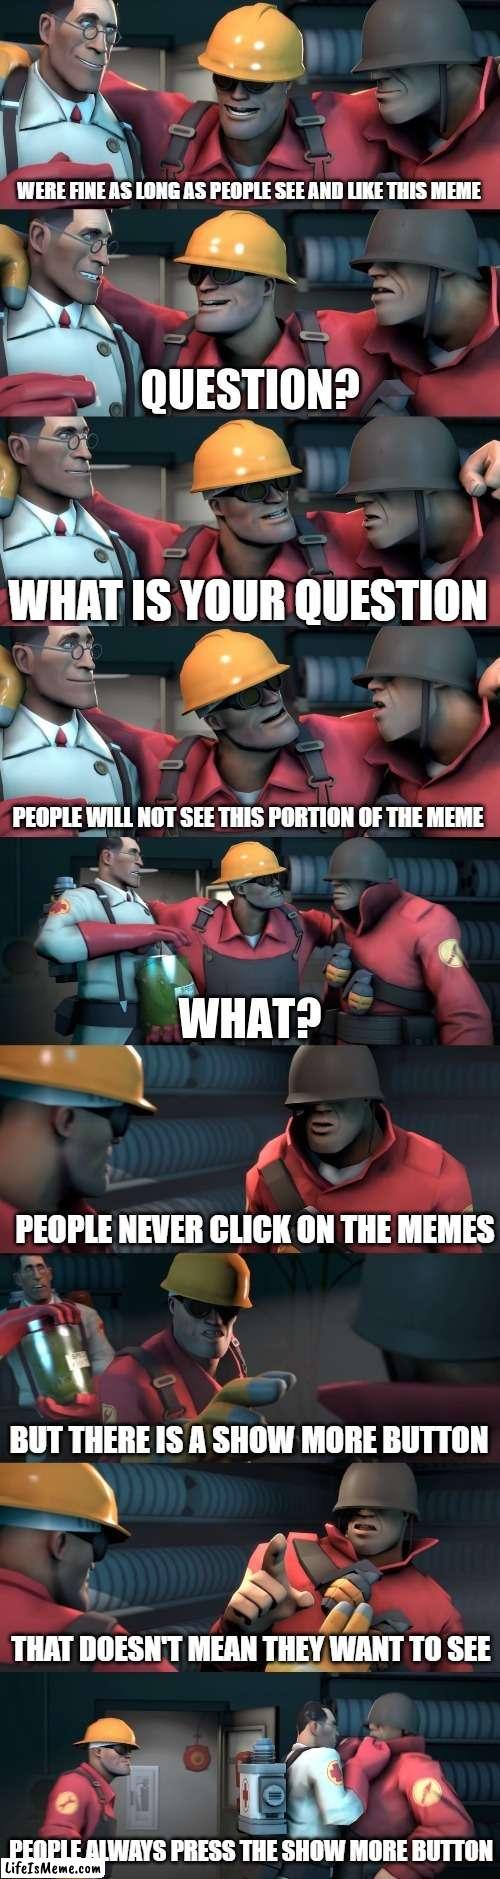 Who even reads these? |  WERE FINE AS LONG AS PEOPLE SEE AND LIKE THIS MEME; WHAT IS YOUR QUESTION; PEOPLE WILL NOT SEE THIS PORTION OF THE MEME; PEOPLE NEVER CLICK ON THE MEMES; BUT THERE IS A SHOW MORE BUTTON; THAT DOESN'T MEAN THEY WANT TO SEE; PEOPLE ALWAYS PRESS THE SHOW MORE BUTTON | image tagged in tf2 teleport bread meme english,tf2,funny,meta,4th wall,gaming | made w/ Lifeismeme meme maker